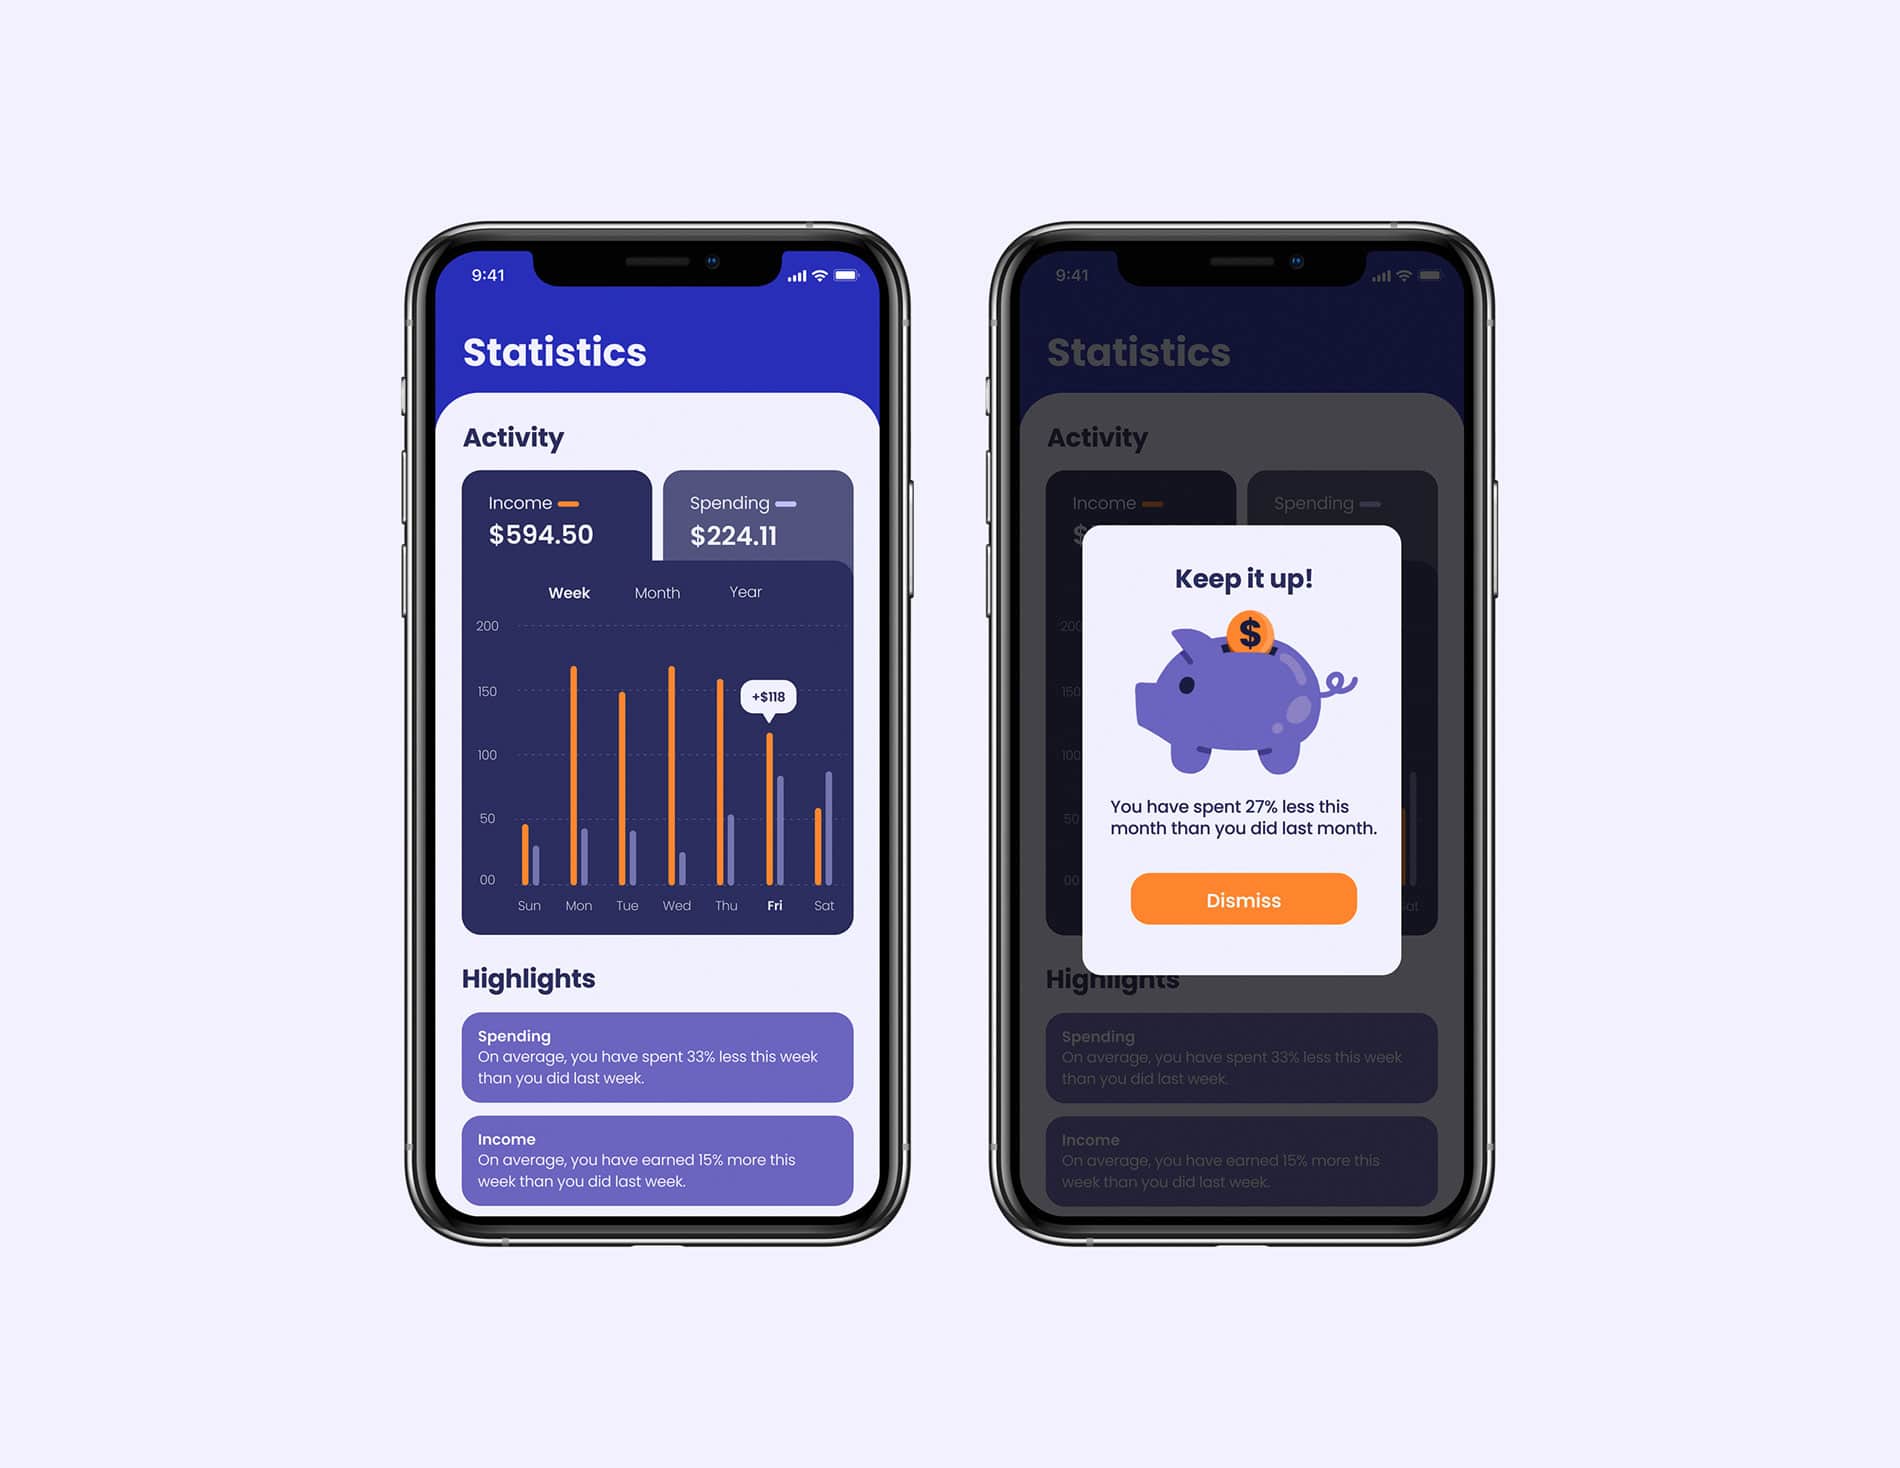 Forwo financial app phone mockups of the statistics and dialogue box screen with an illustrated purple piggy bank